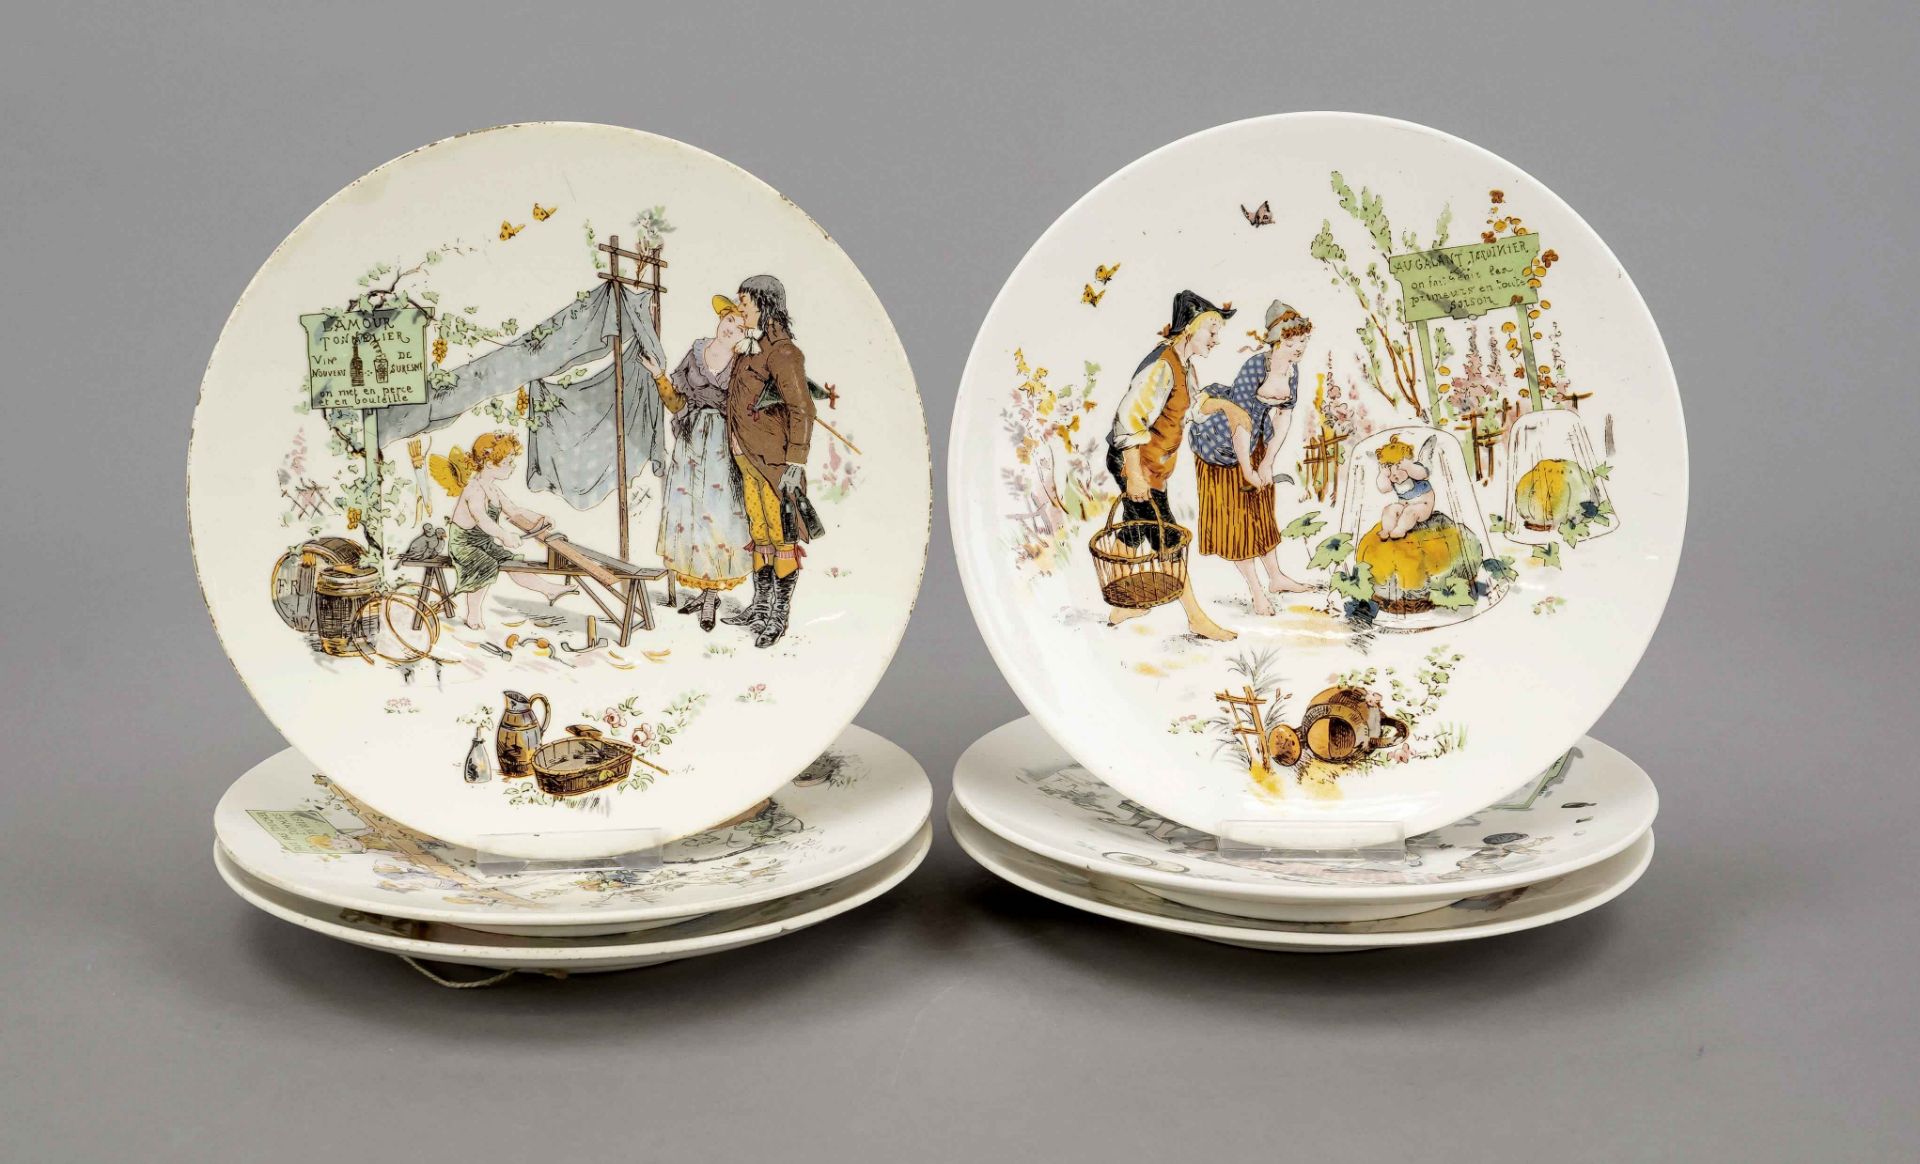 Six wall plates, Sarreguemines. c. 1900, ceramic with beige glaze and colorful allegorical